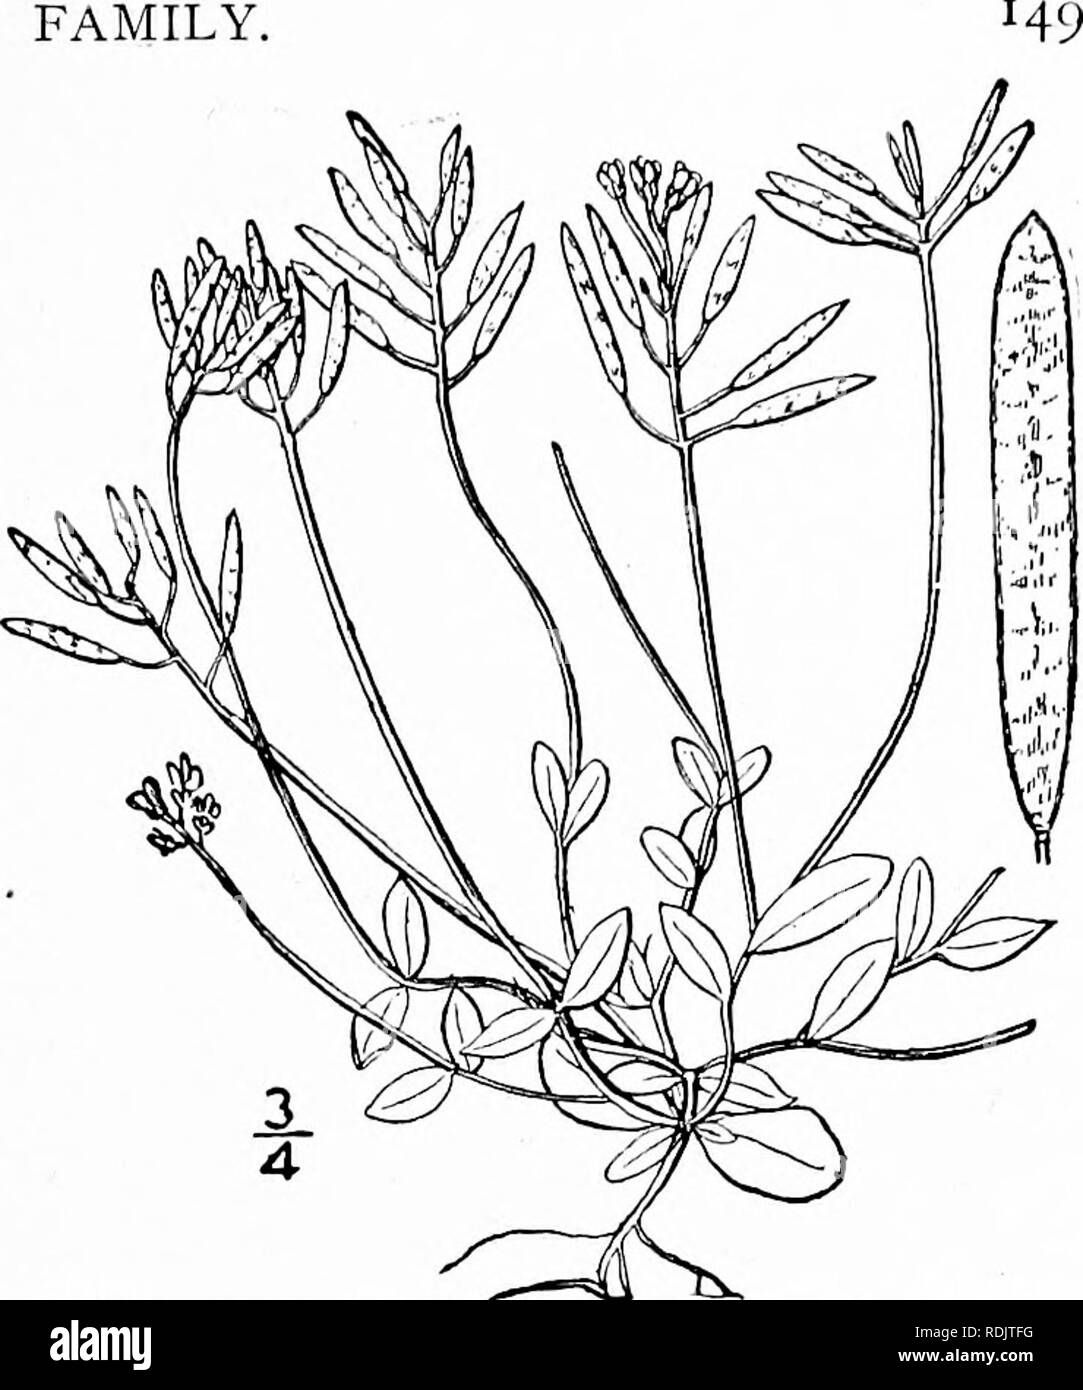 . An illustrated flora of the northern United States, Canada and the British possessions, from Newfoundland to the parallel of the southern boundary of Virginia, and from the Atlantic Ocean westward to the 102d meridian. Botany; Botany. Genus i. MUSTARD FAMILY. 2. Draba caroliniana Walt. Carolina Whitlow-grass. Fig. 1998. Draba caroliniana Walt. Fl, Car. 174. 1788. Draba hispidiila Michx, Fl. Bor. Am. 2 : 28. 180,3. Draba caroliniana inicrantlia A. Gray, Man. Ed, 5, 72. 1867. Draba micrantha Nutt.; T. &amp; G. Fl. N. A. i: 109. 1838. Winter-annual, the flowering scapes I'-s' liigh from a short Stock Photo